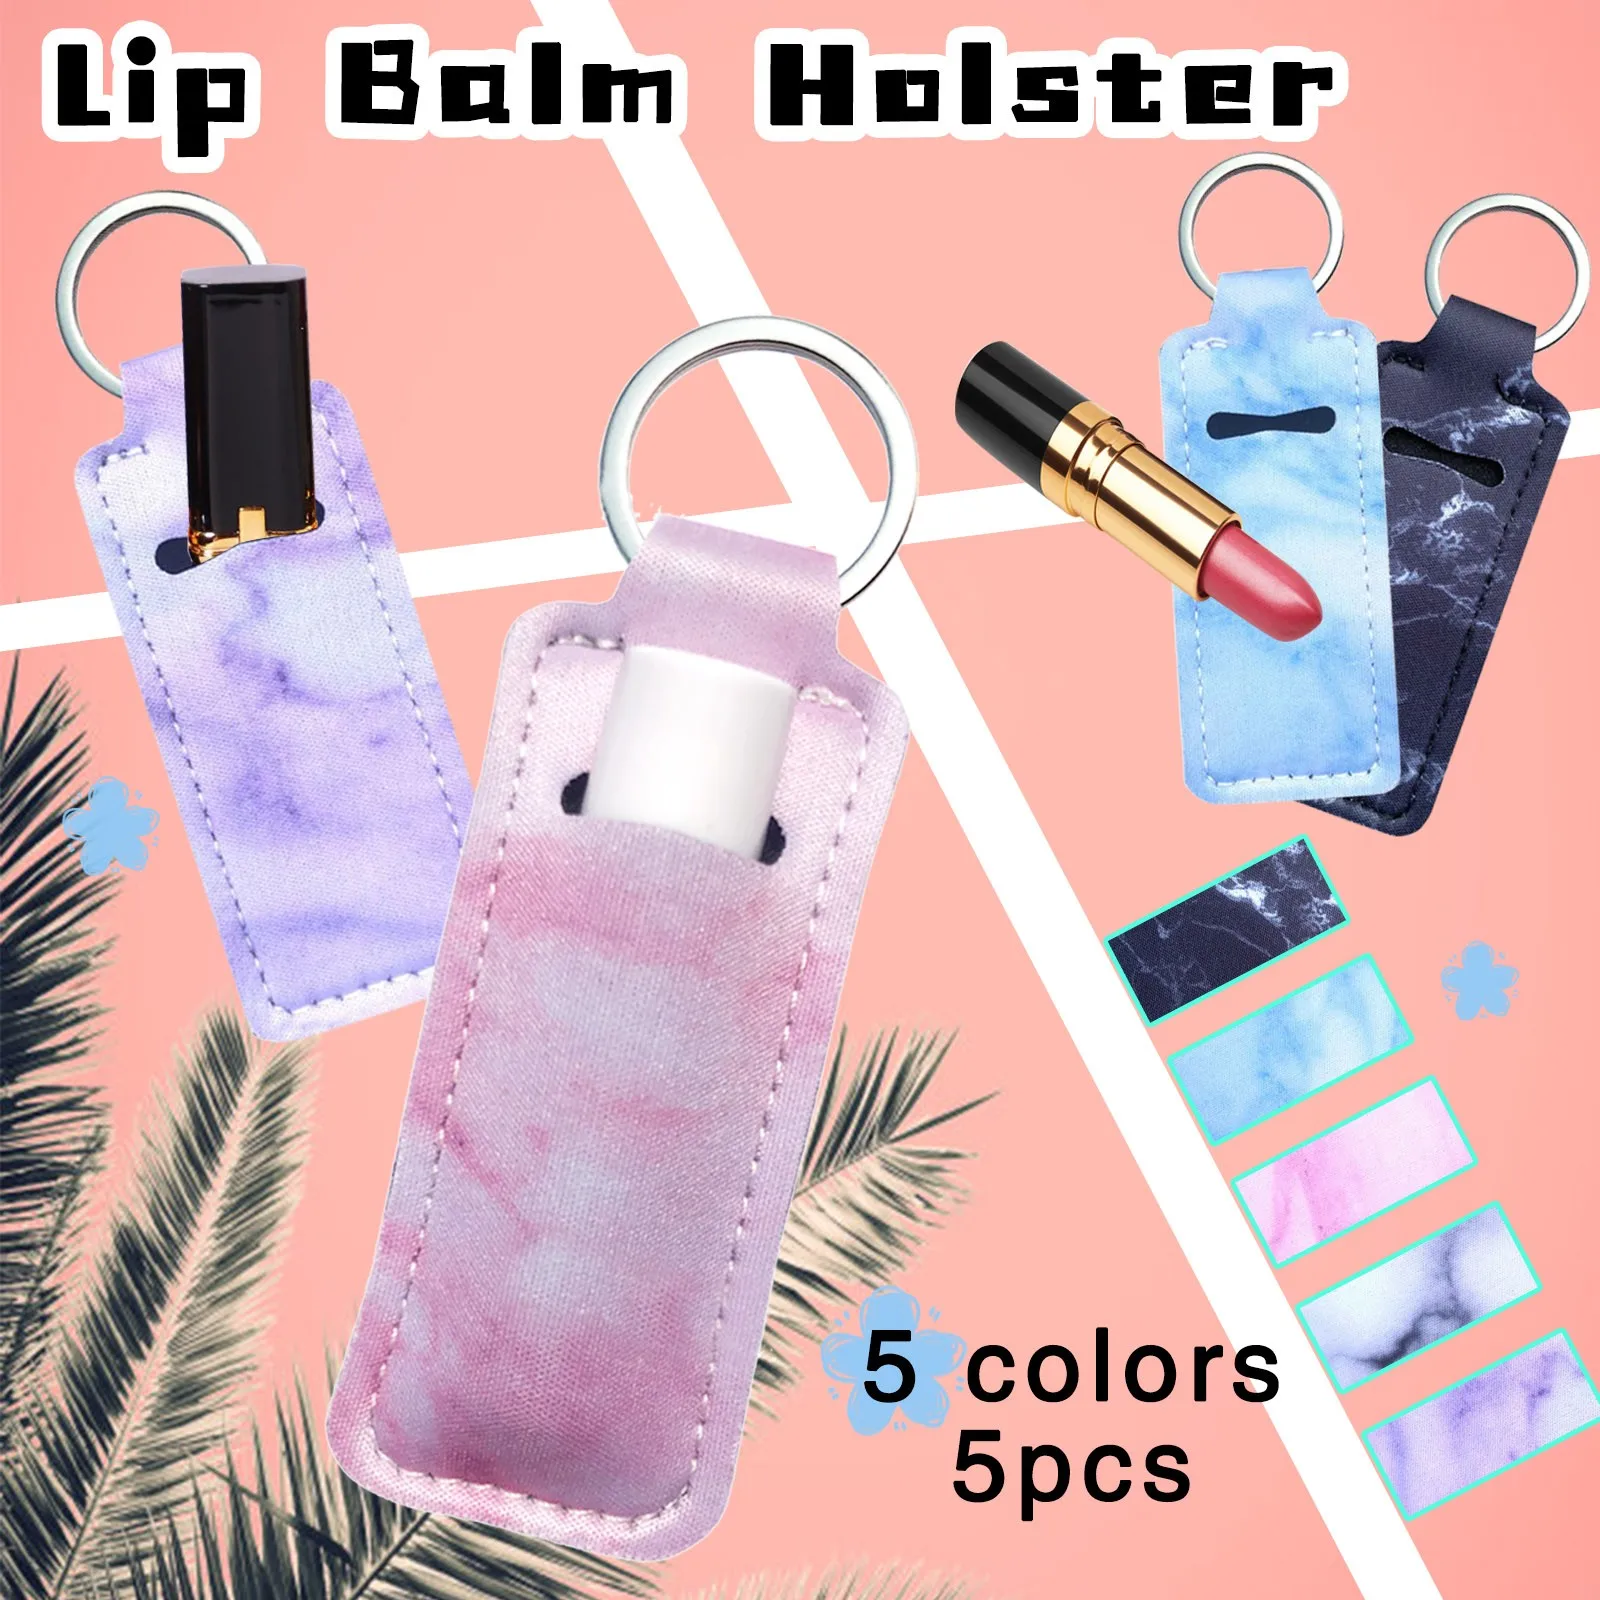 

5 Pieces Marbling Colorized Lipstick Chapstick Holder Bag Keychain Jewelry Gifts Accessories Lip Balm Neoprene Lipsticks Pouch 6